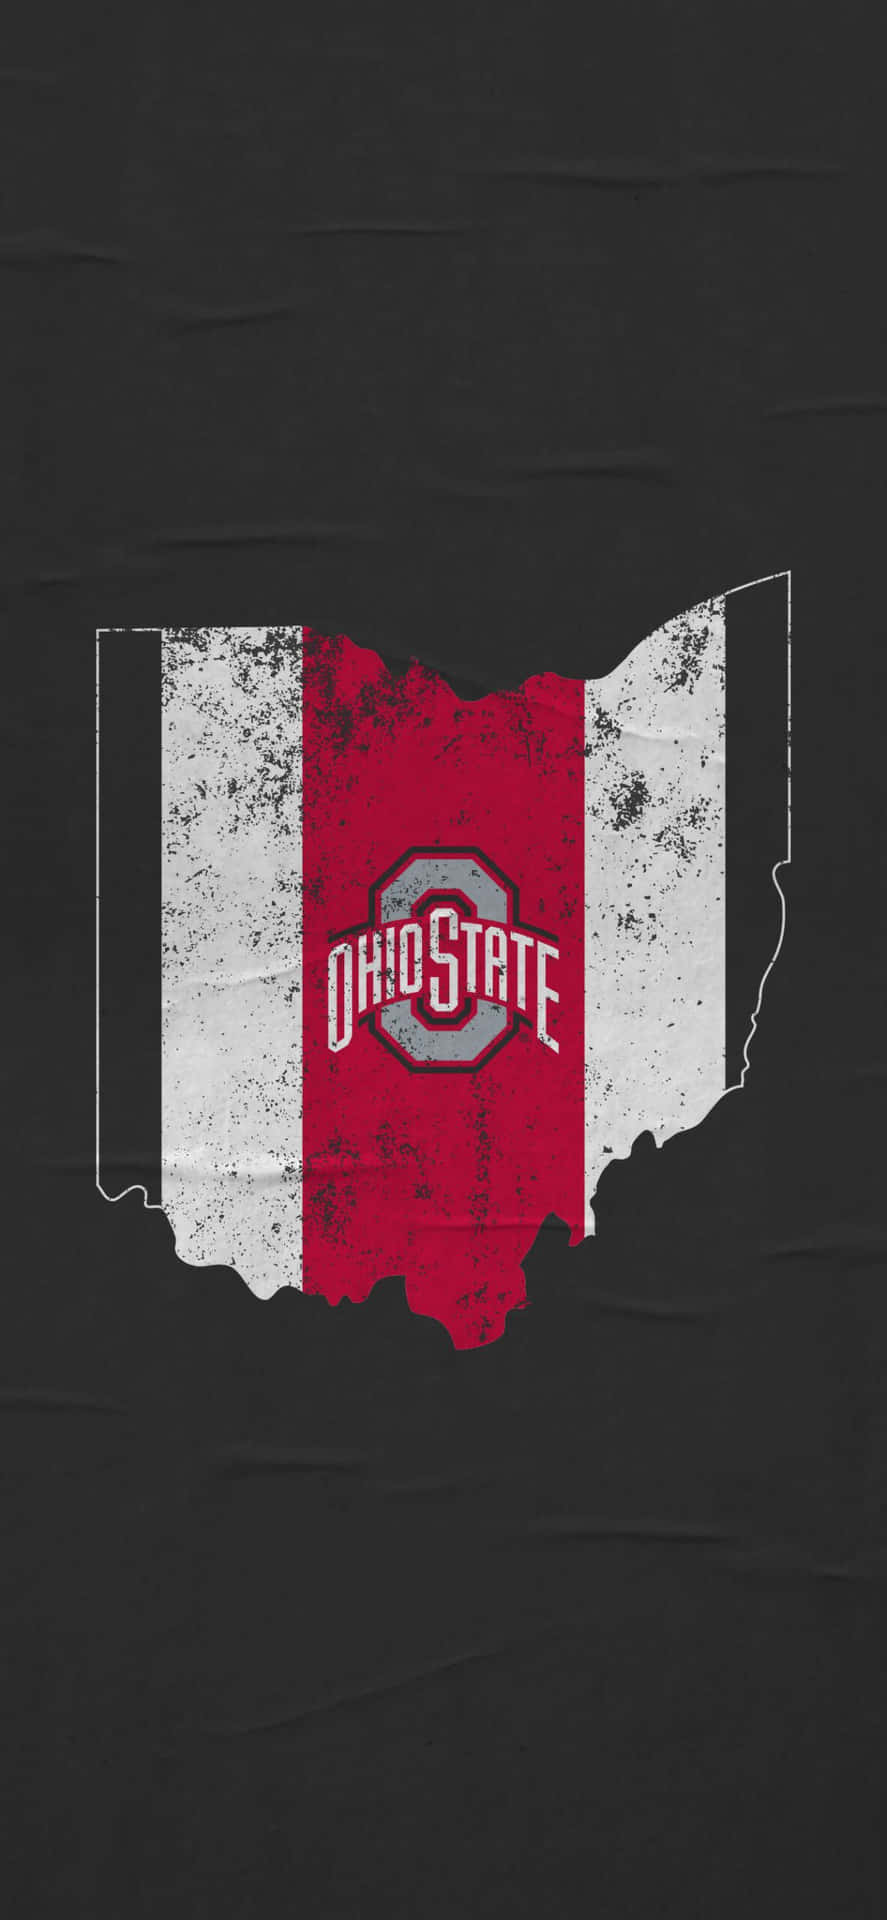 Download denne smukke Ohio State University Iphone wallpaper for at vise din Buckeye stolthed! Wallpaper